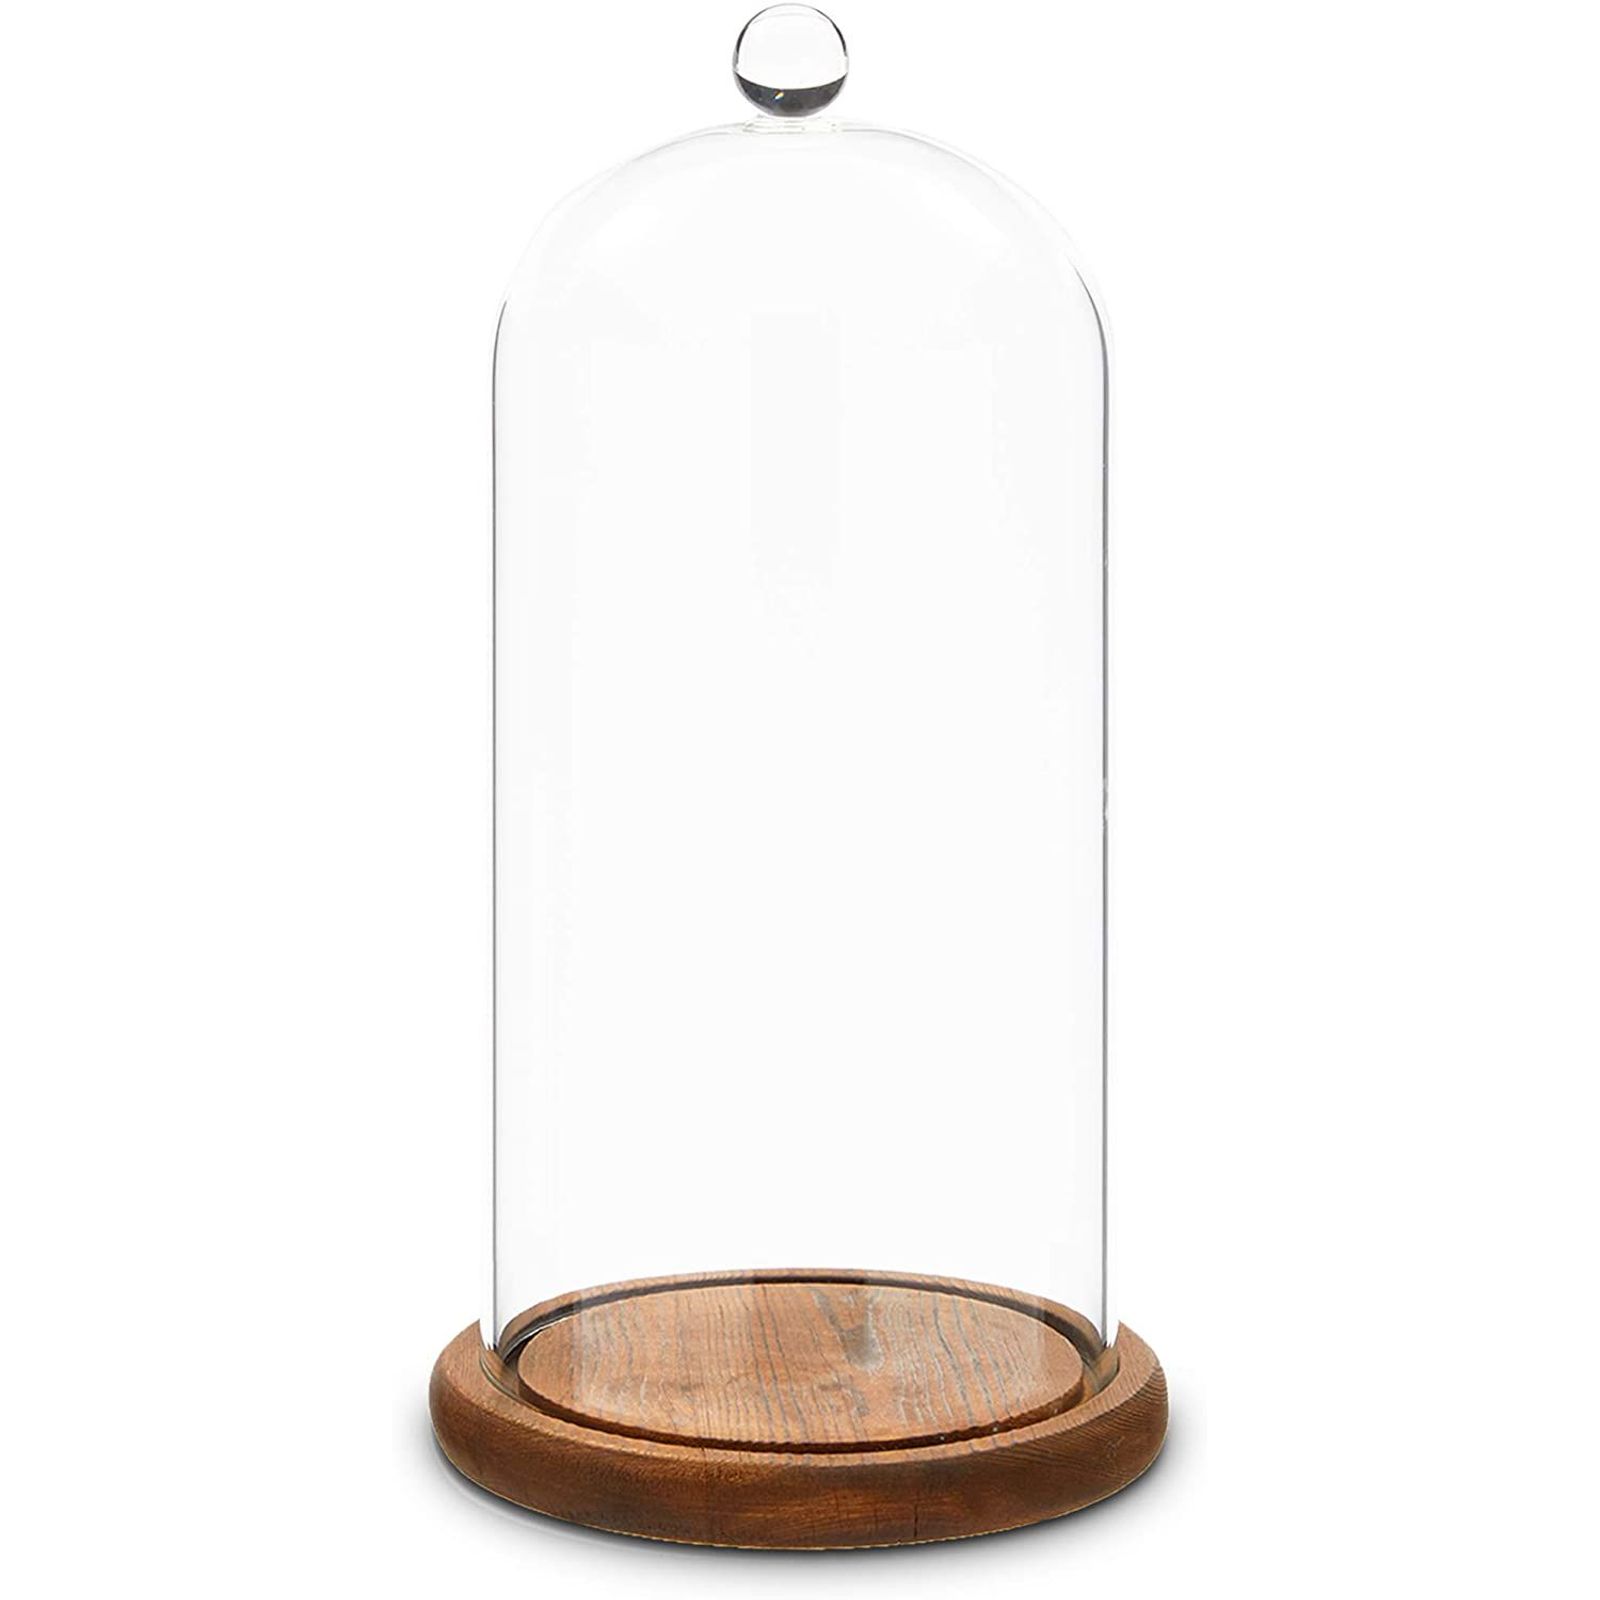 10" Clear Glass Cloche Dome with Wooden Base, Bell Jar Display Case for Eternal Flower, Plants, C... | Walmart (US)